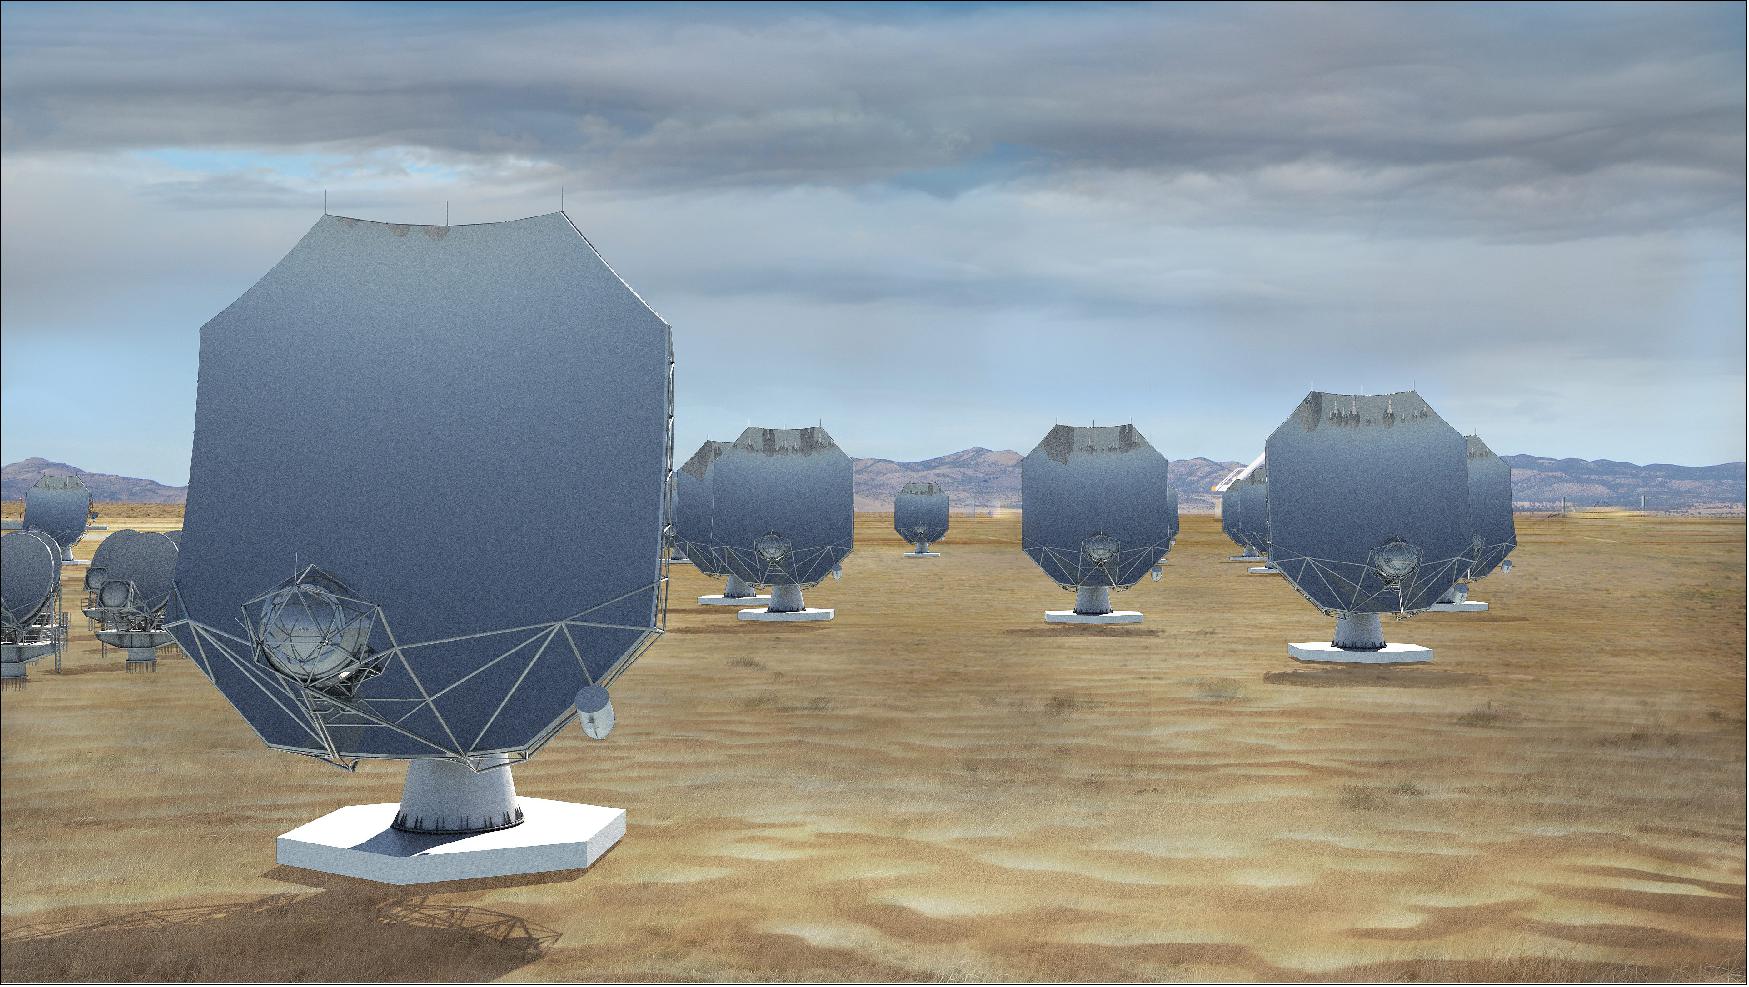 Figure 22: Artist's conception of ngVLA antennas at the current site of the Karl G. Jansky Very Large Array on the Plains of San Agustin in west-central New Mexico (image credit: NRAO/AUI/NSF, Sophia Dagnello)